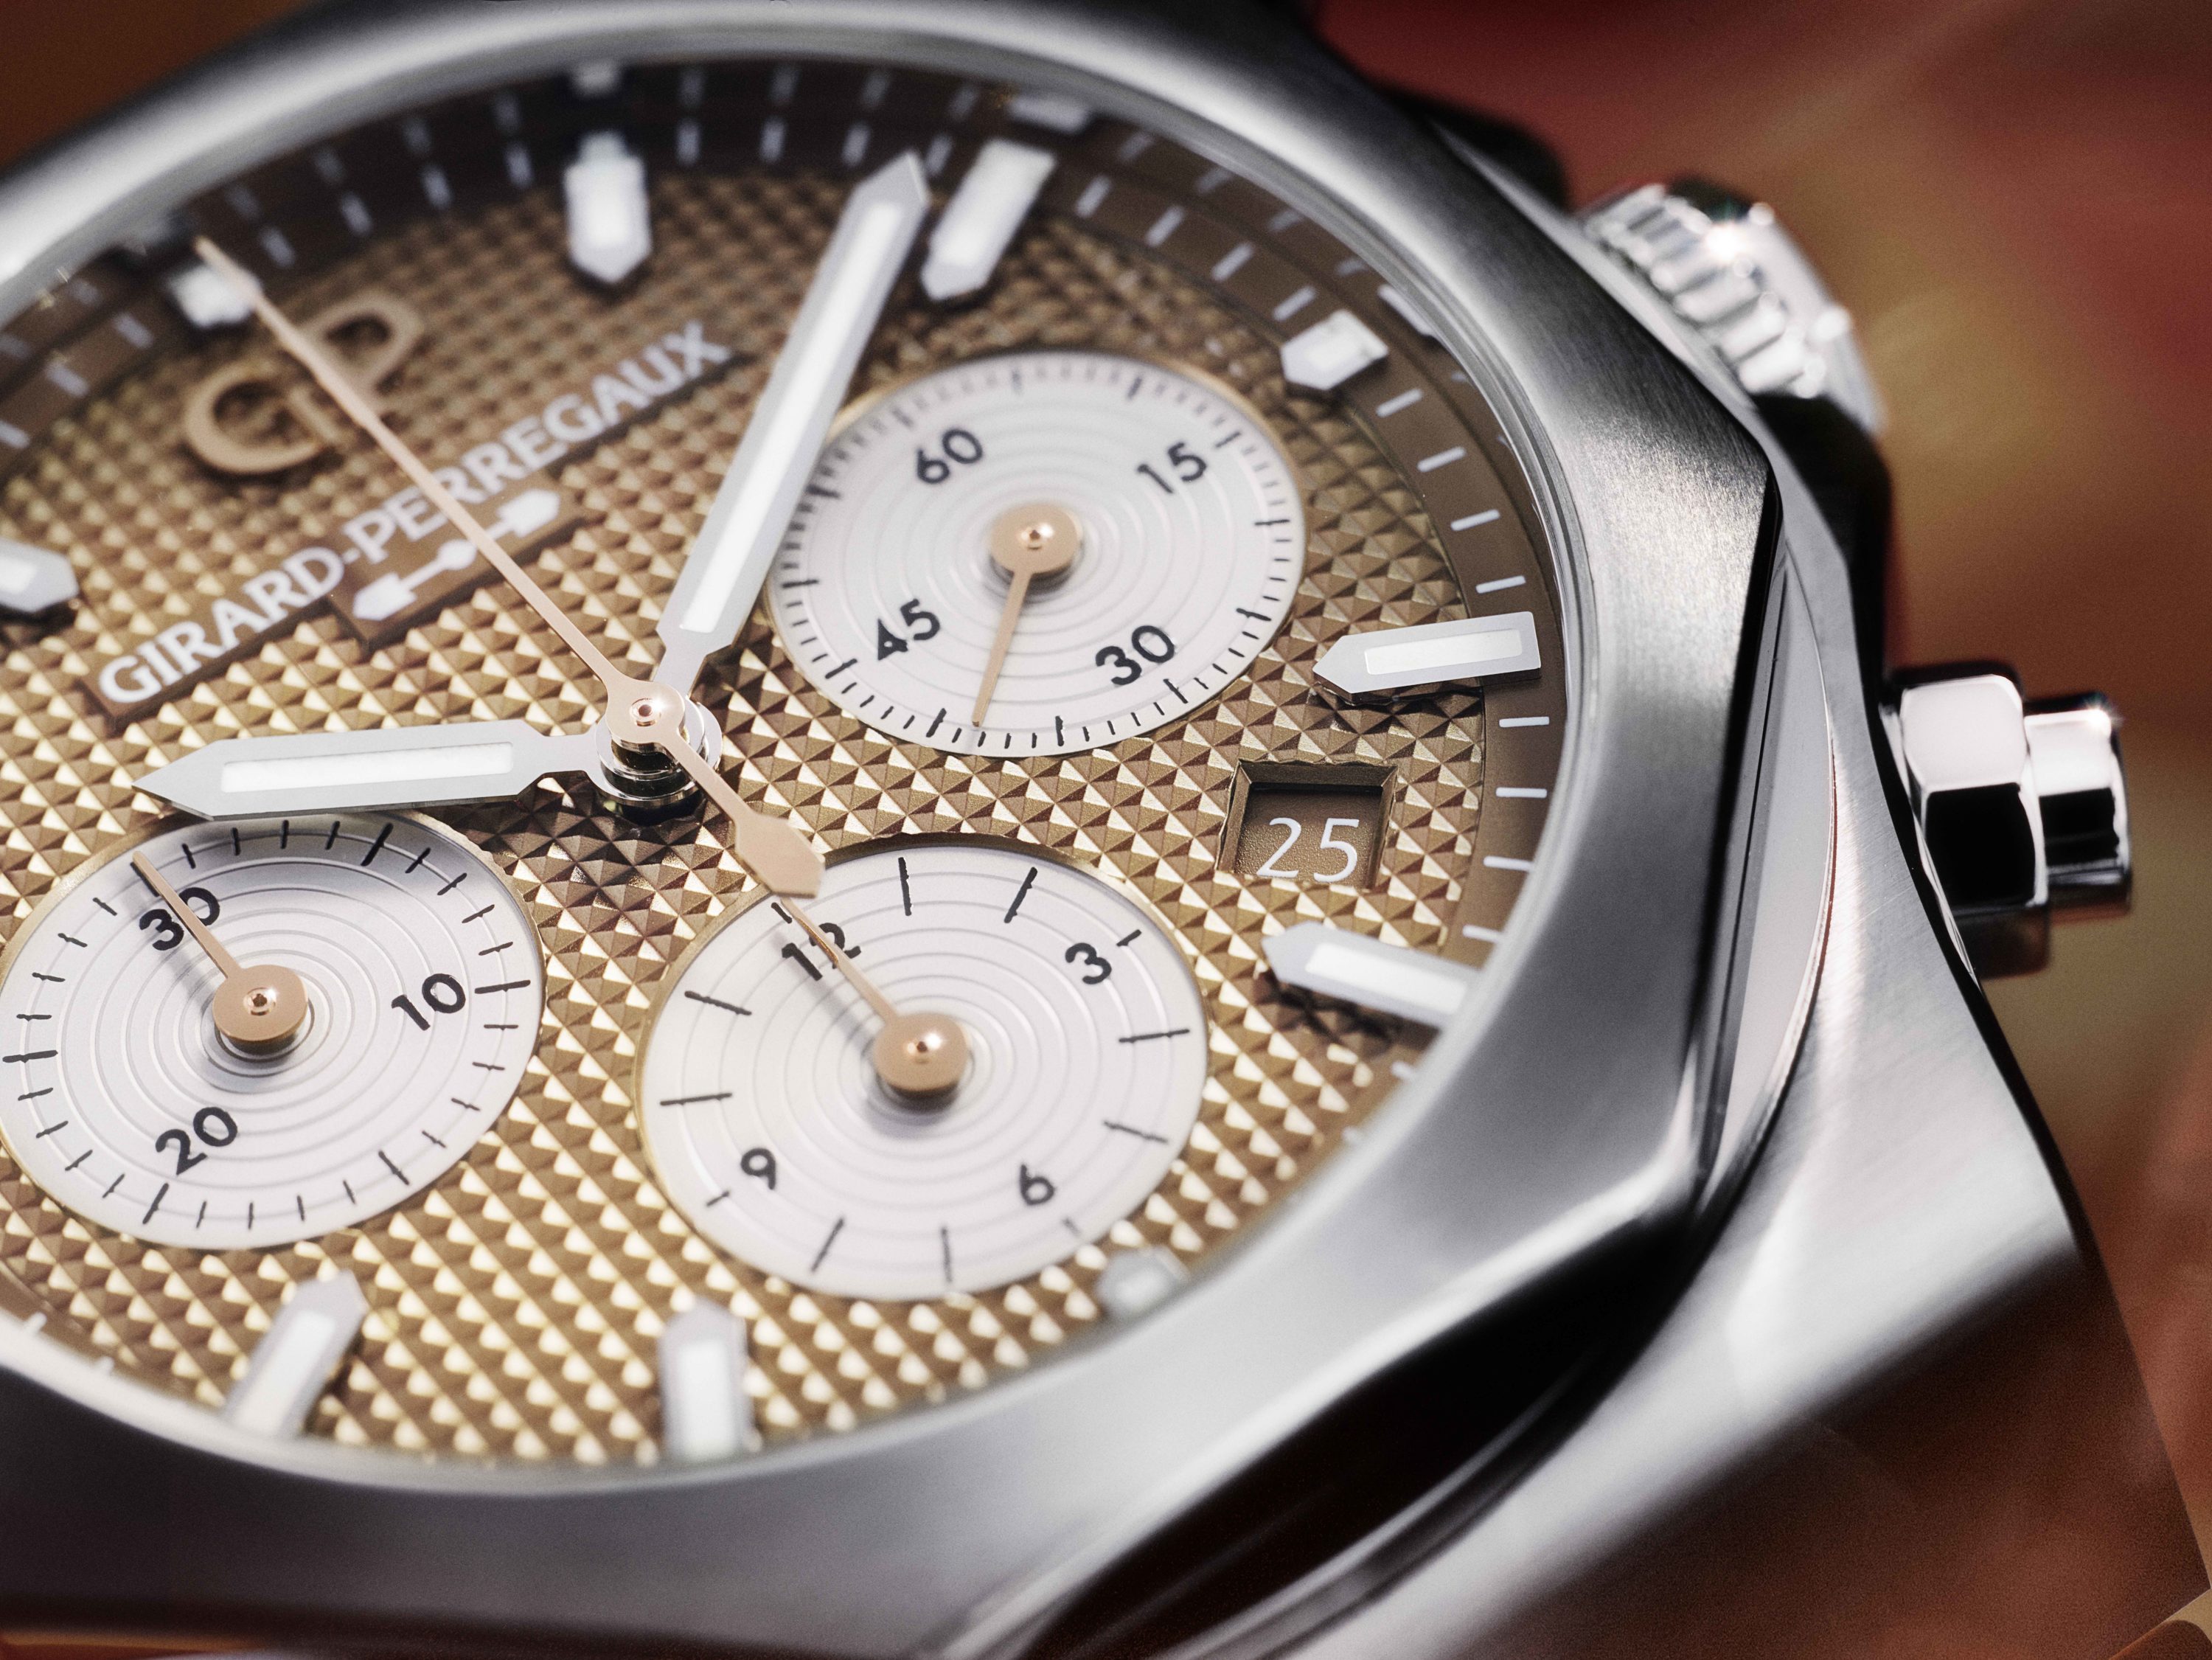 Citizen’s New Mechanical Caliber 0200 Fuses Swiss and Japanese Watchmaking Traditions